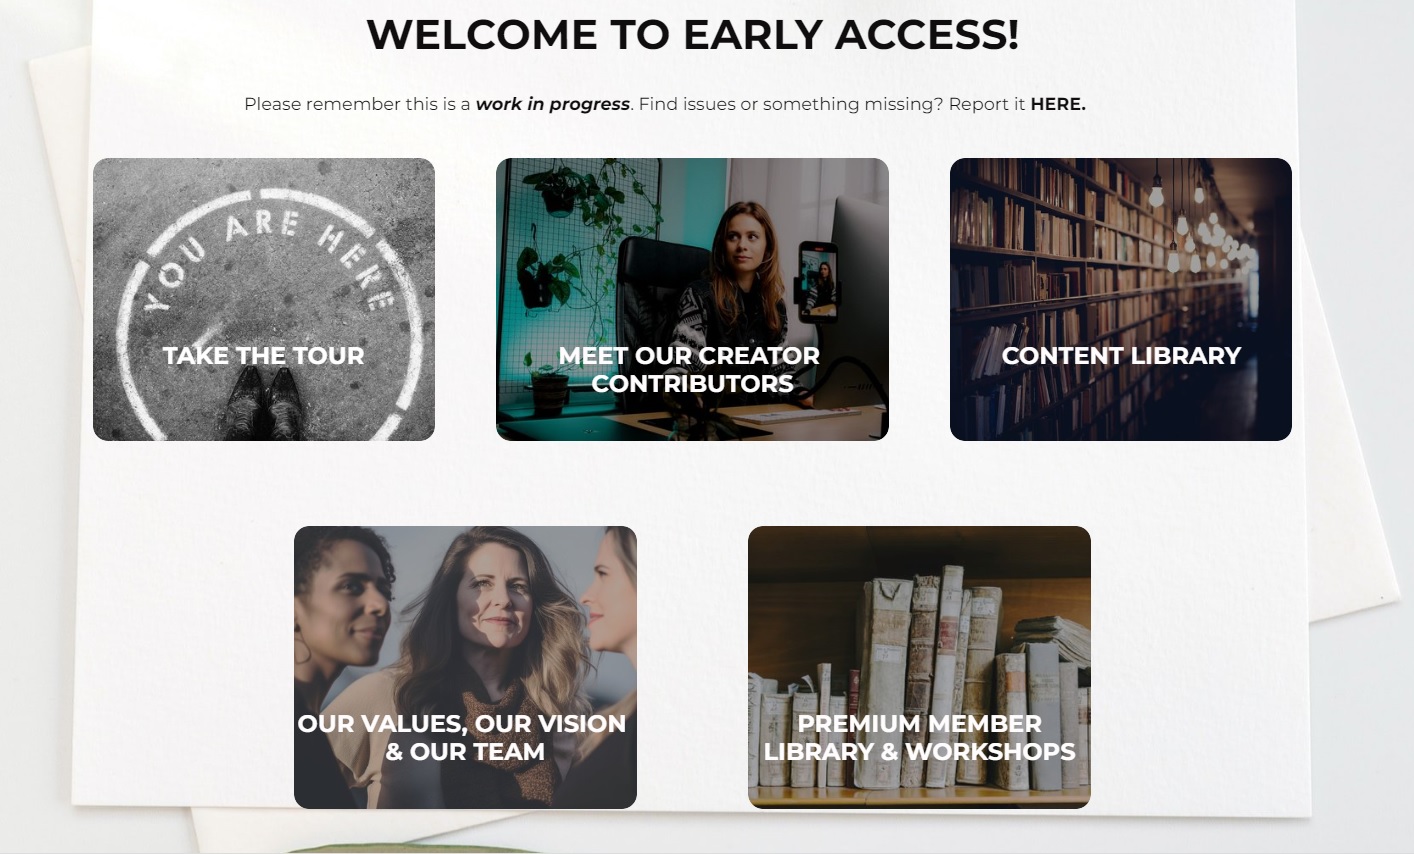 Welcome to early access of the Made to Homeschool Community